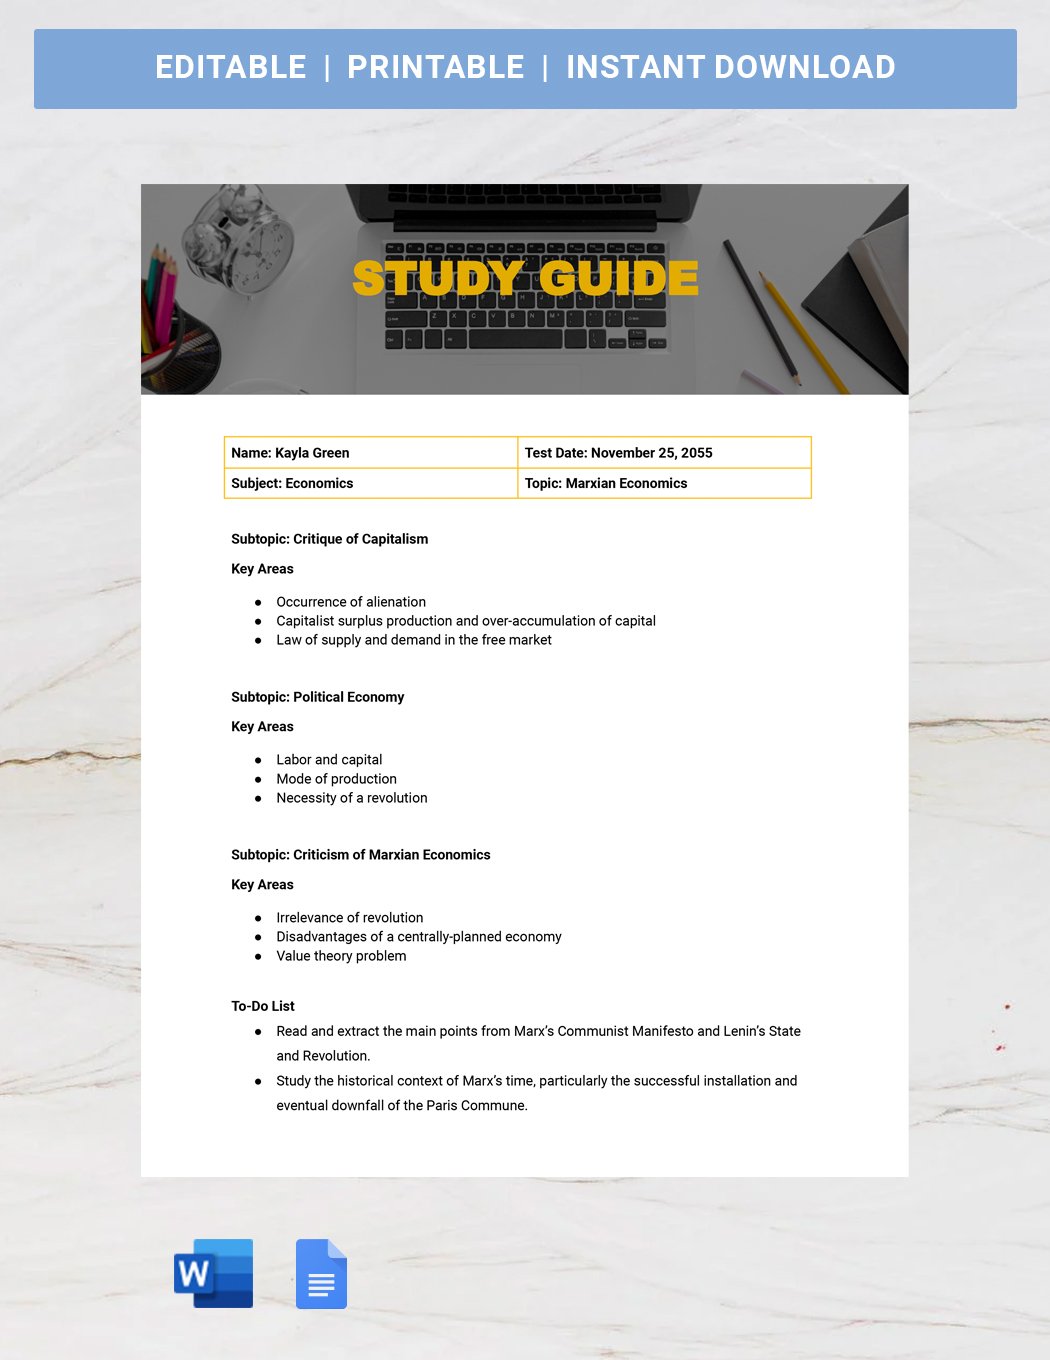 Study Guide Template Download in Word, Google Docs, Apple Pages